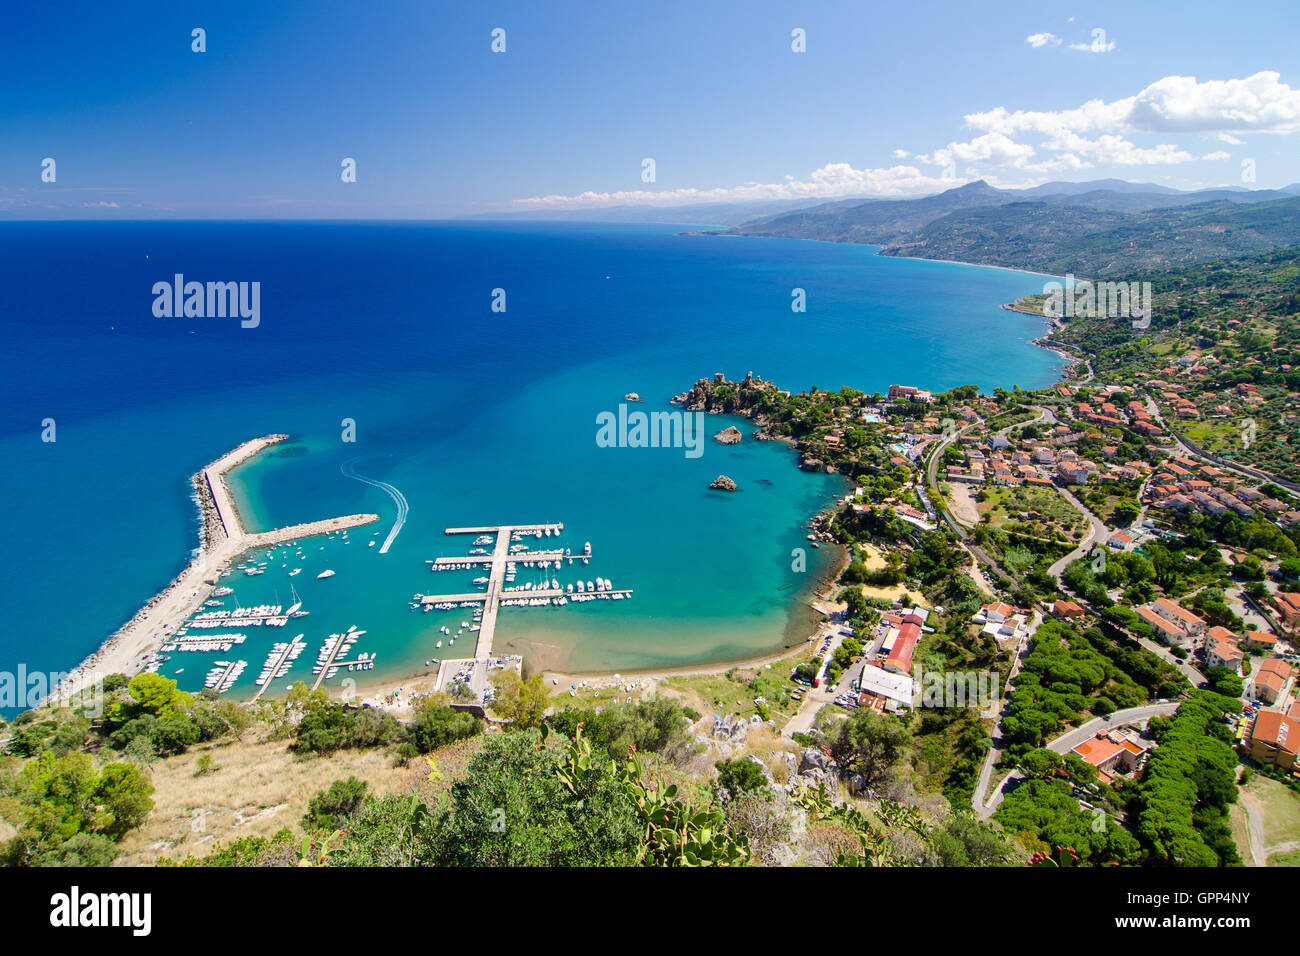 Aerial view of the Cefalu, Sicily, Italy. Stock Photo